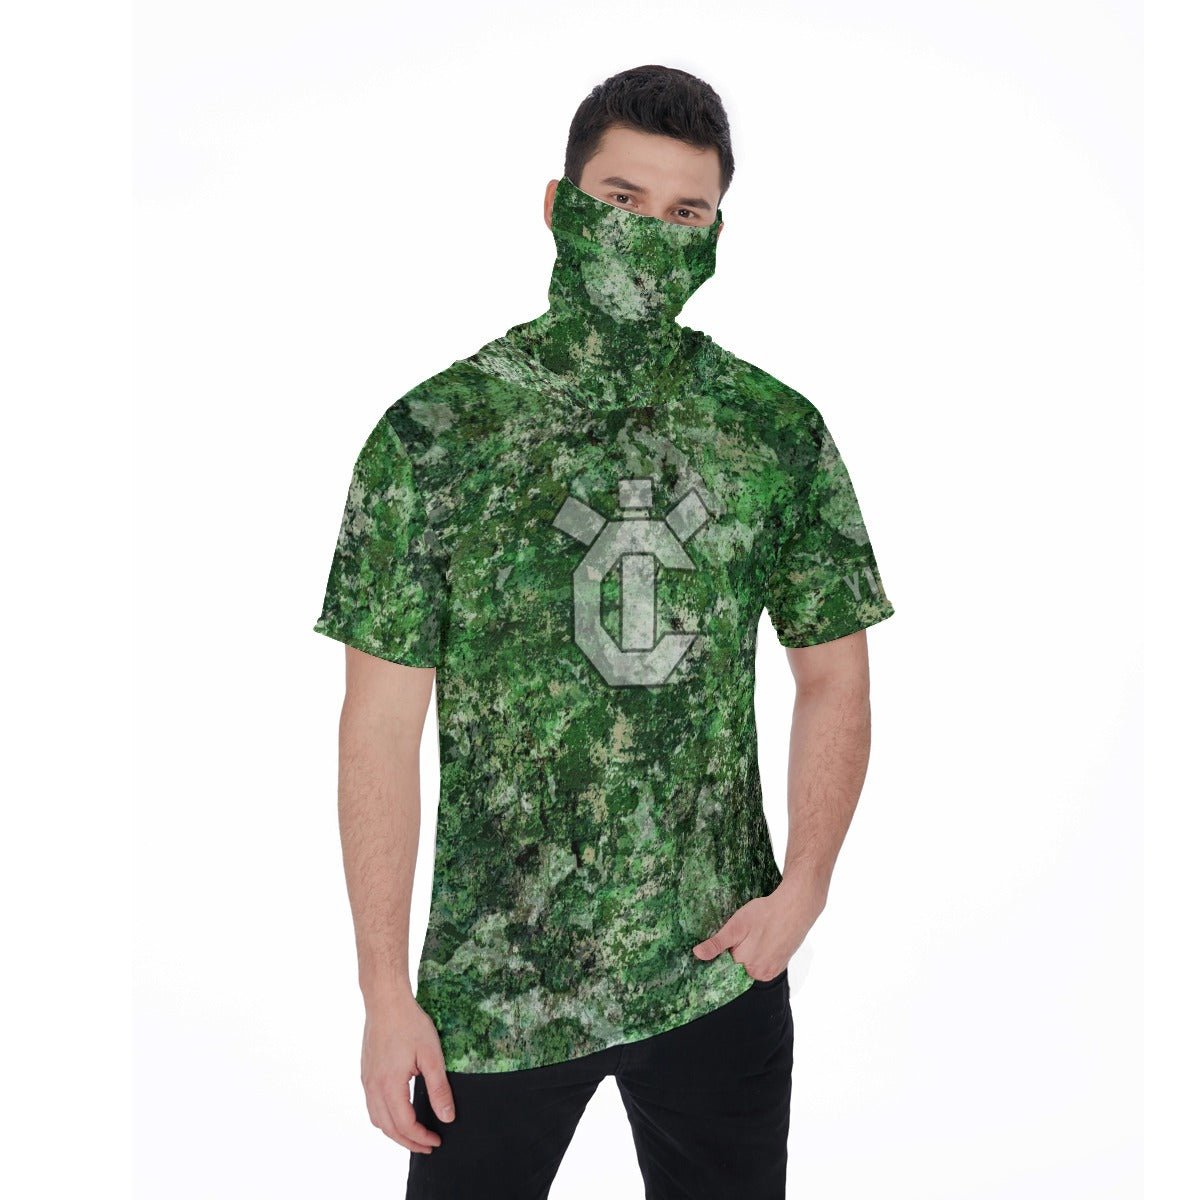 Men's Hooded T's with Built-in Mask -